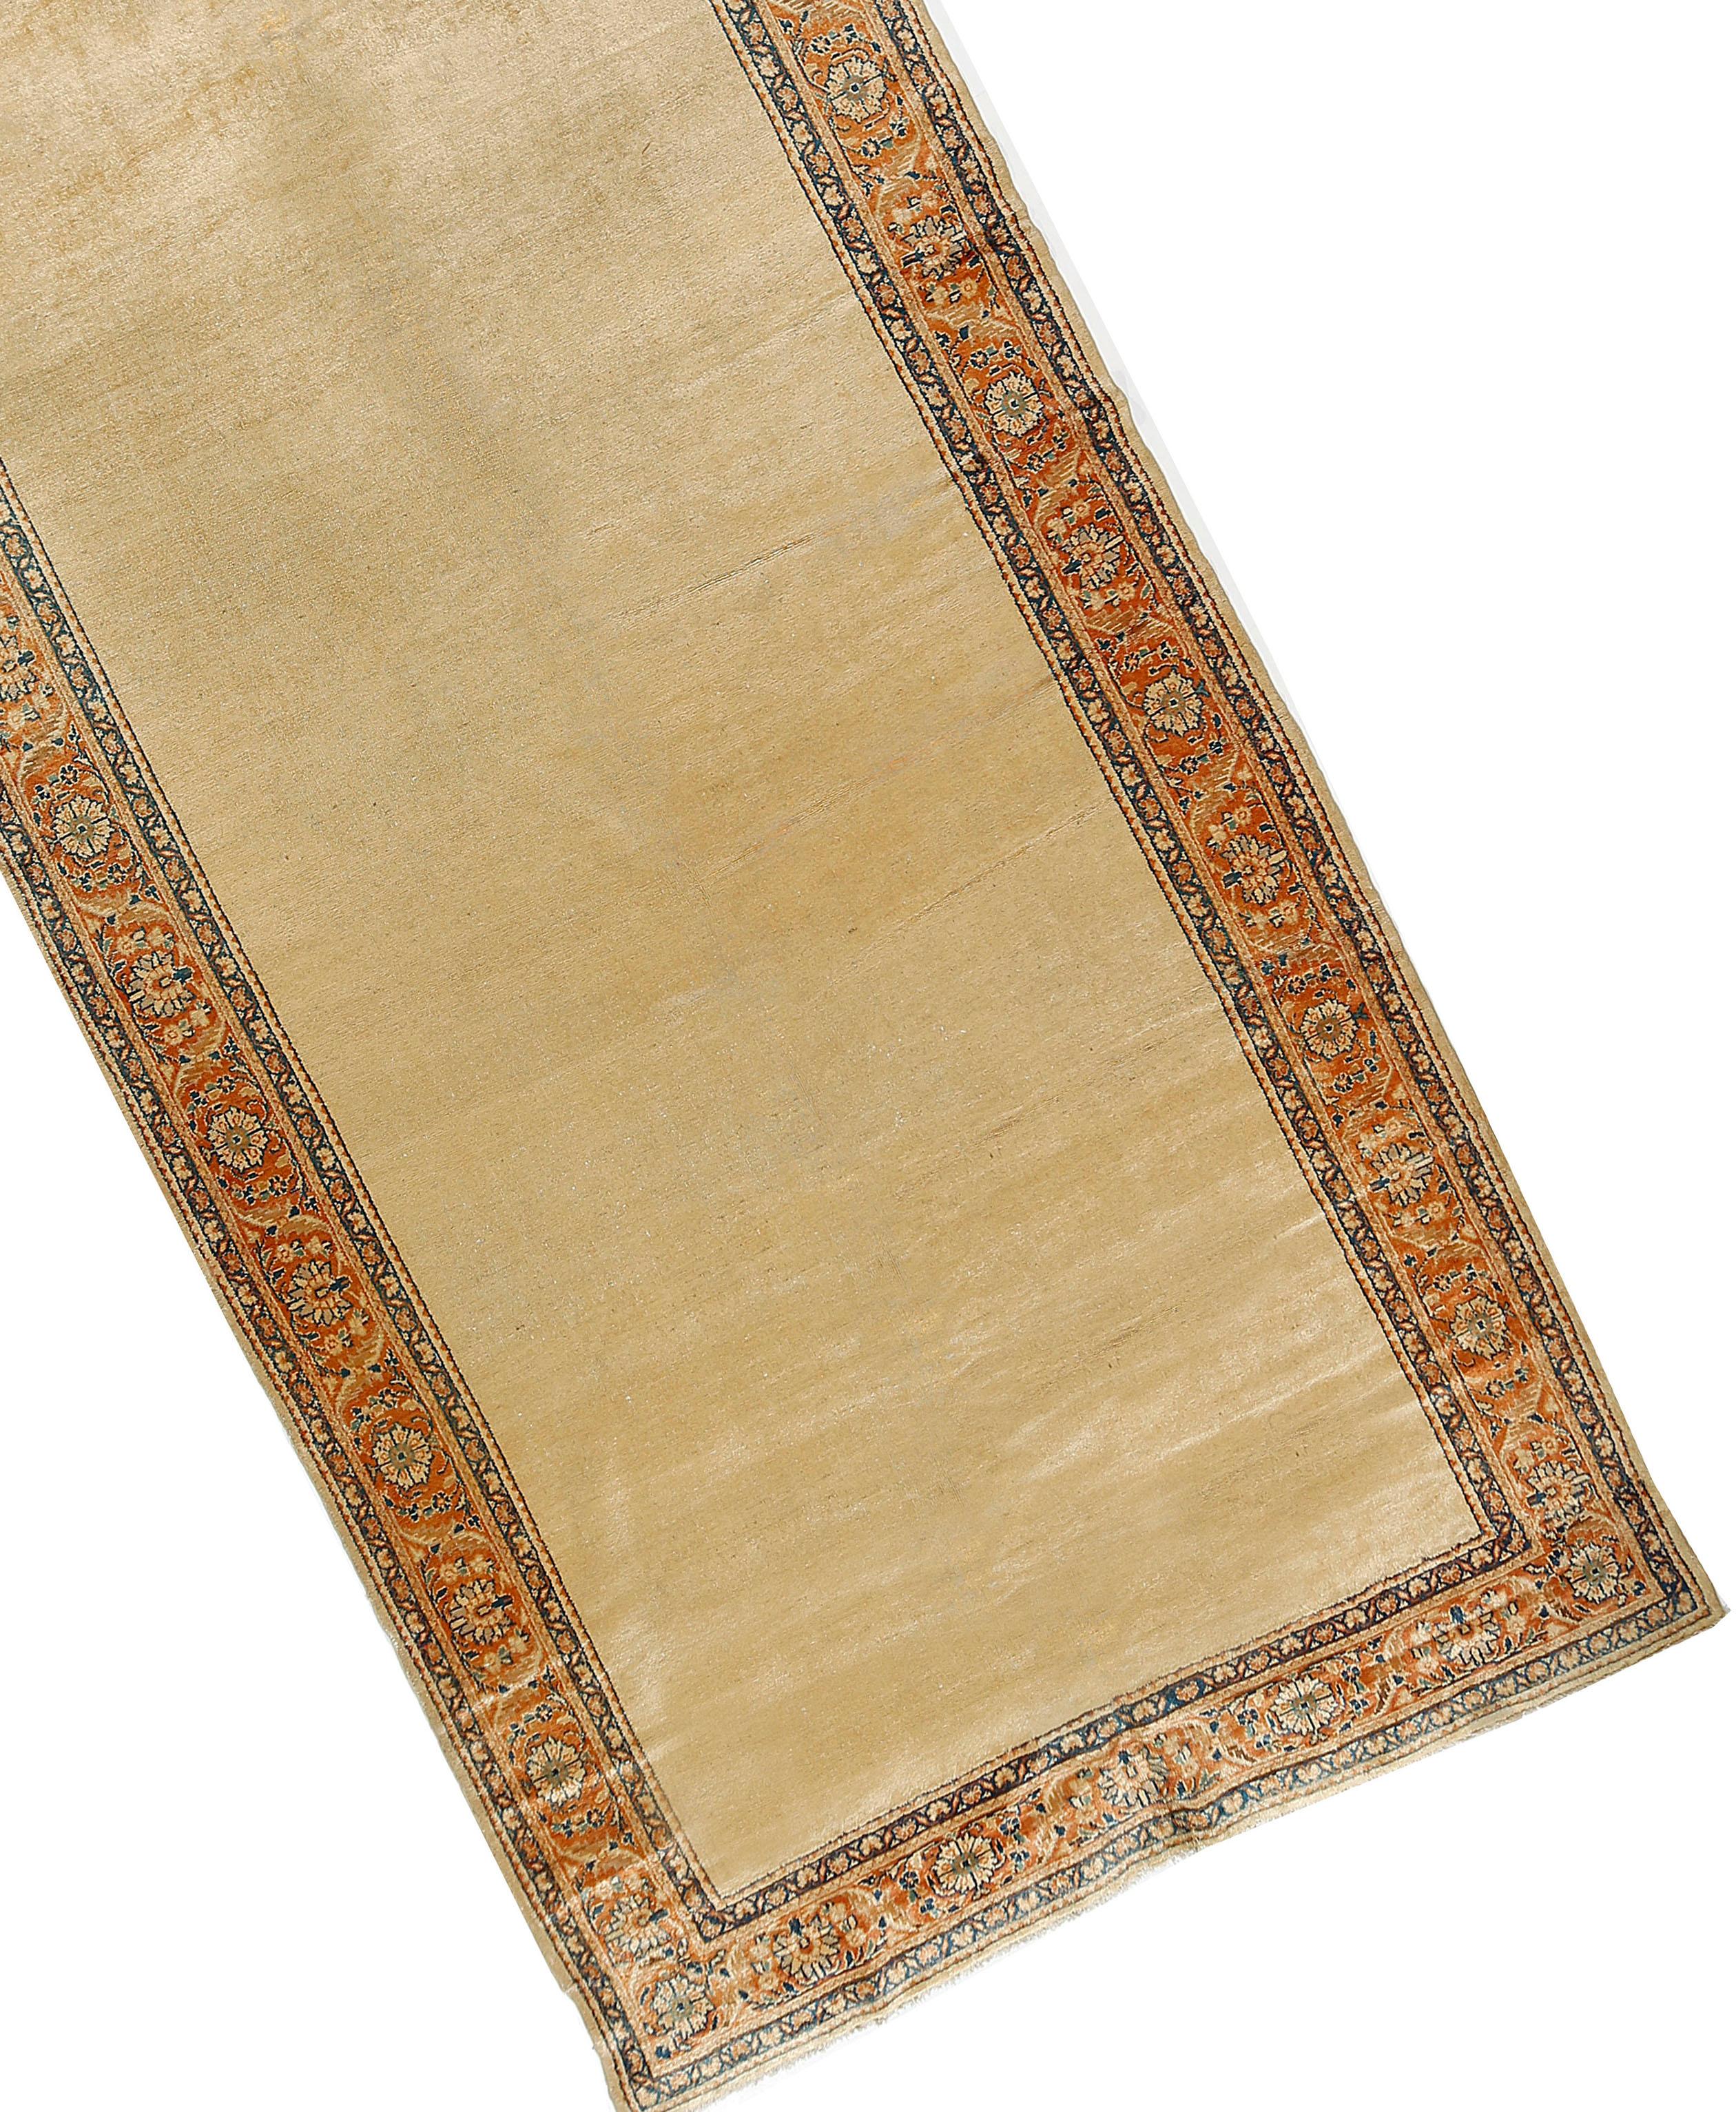 Sultanabad Antique Persian Caramel Mahal Runner Gallery Carpet, circa 1910, 6'10 x 14'8 For Sale